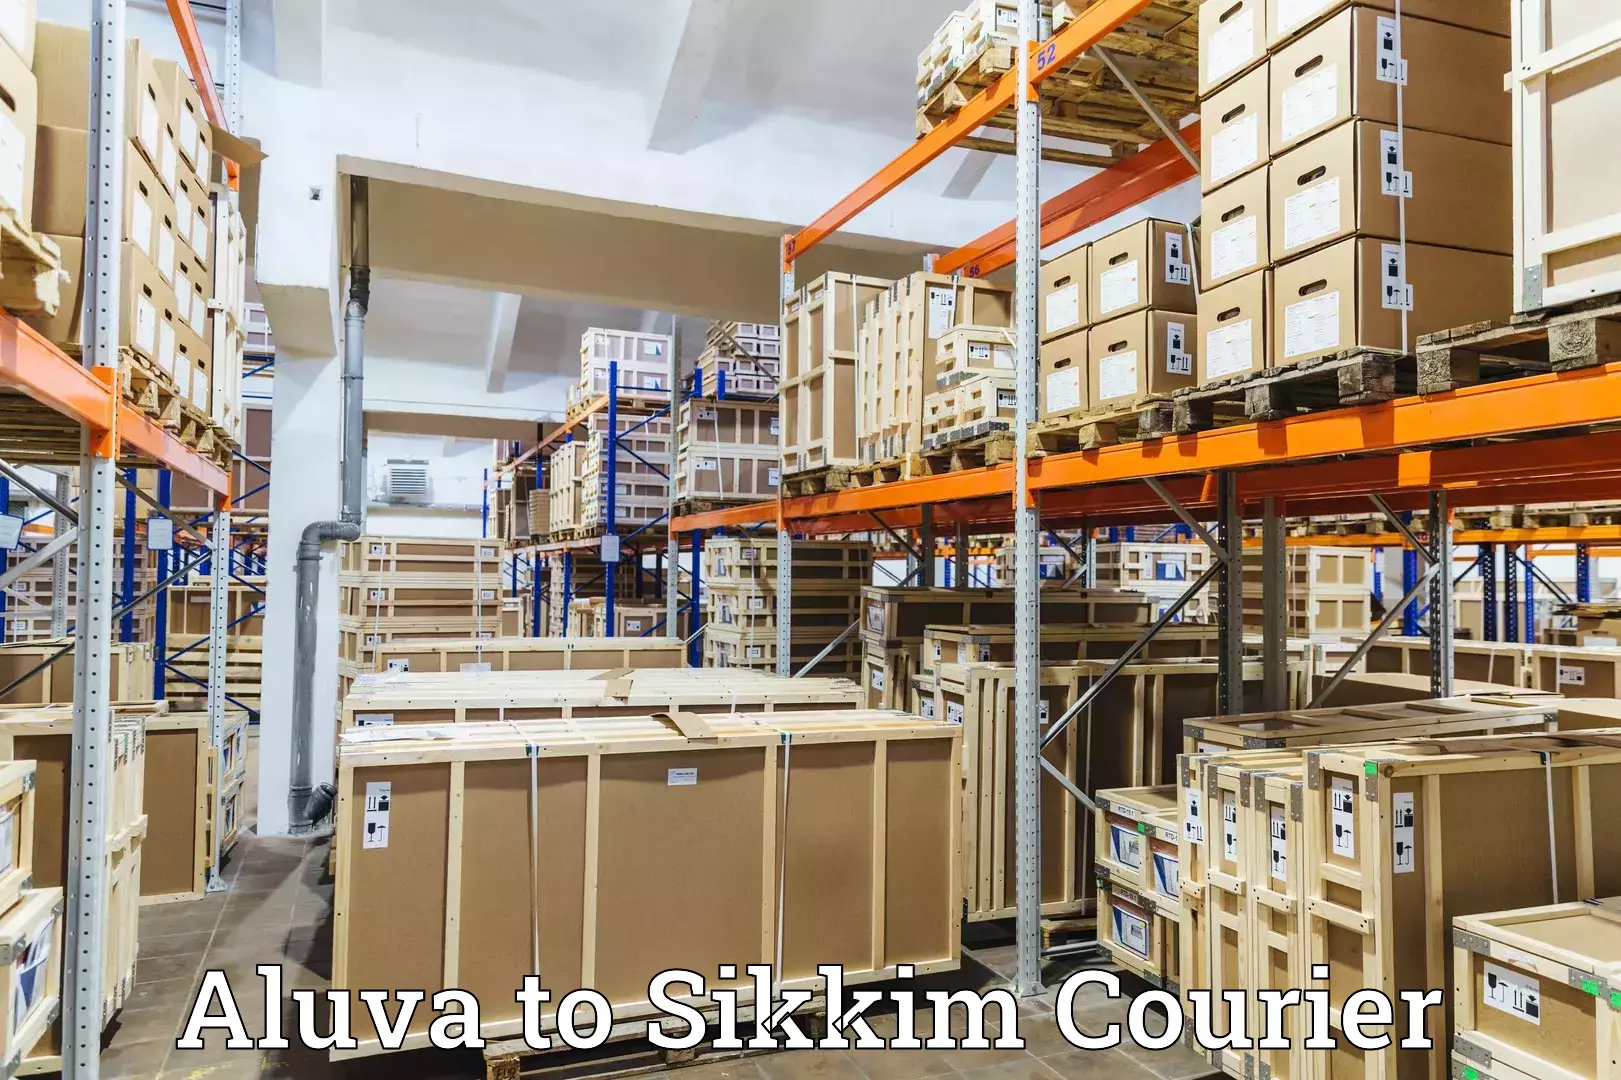 Delivery service partnership Aluva to Sikkim